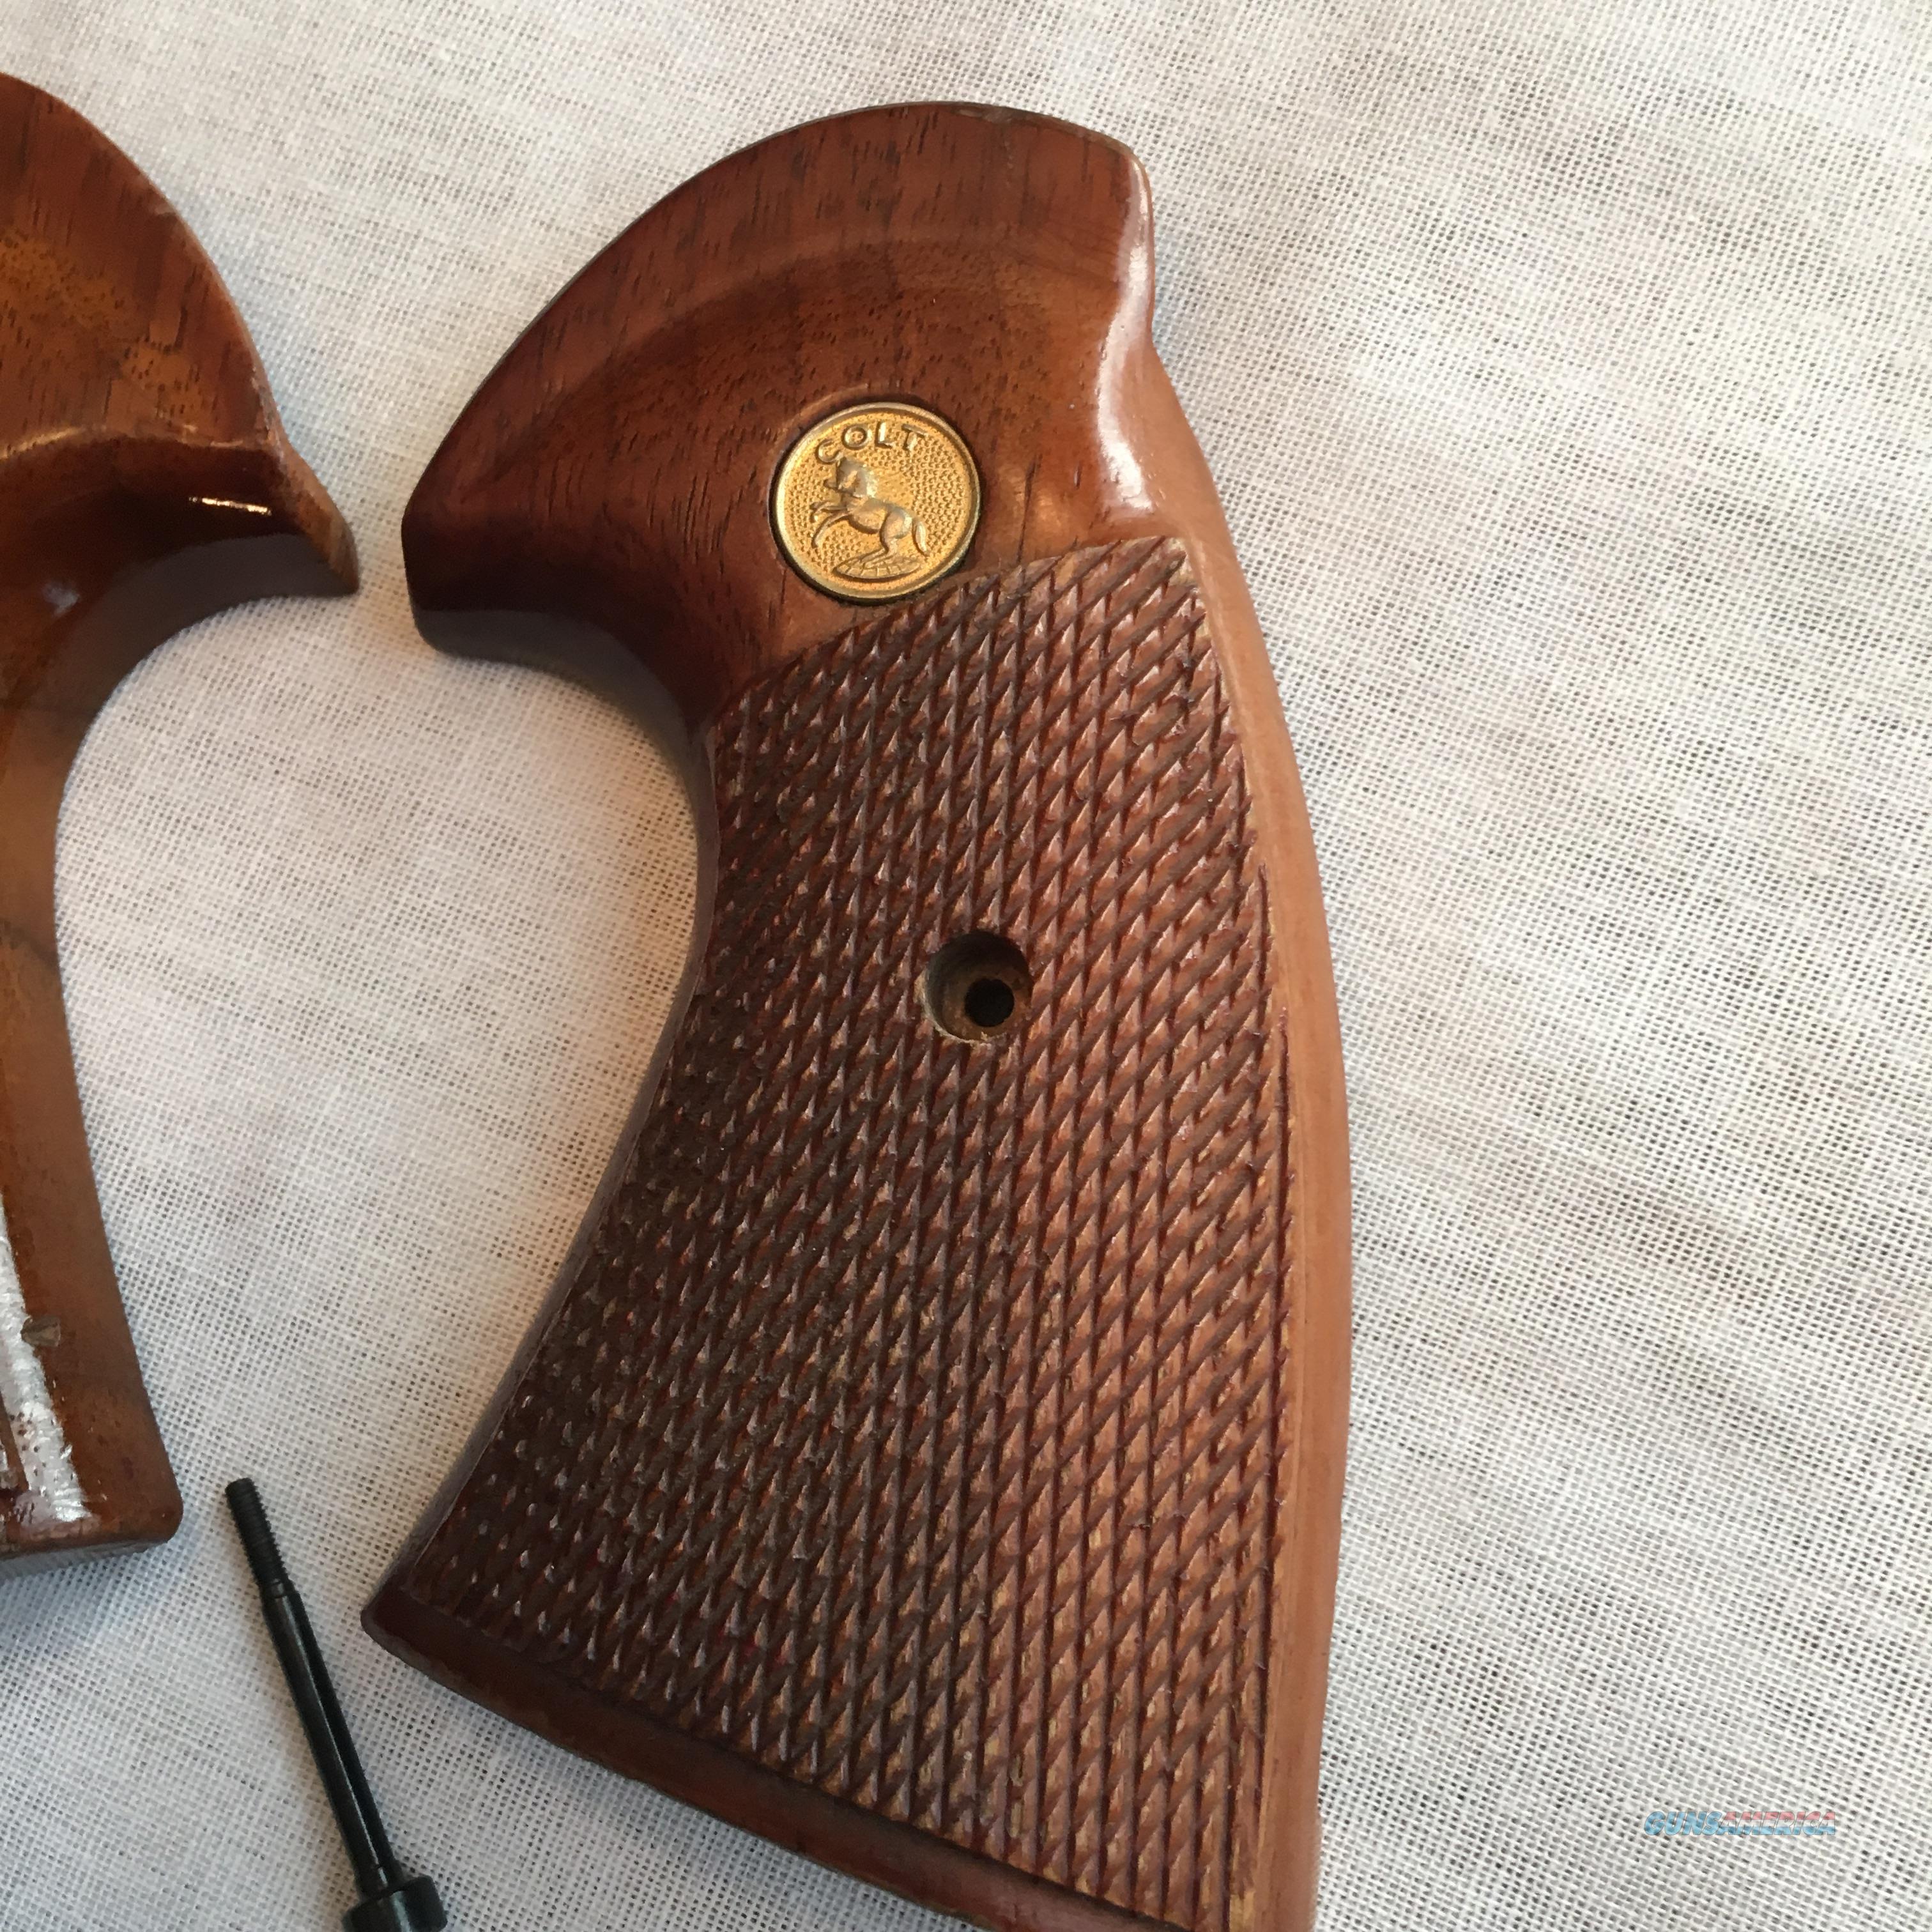 Colt Python Factory Wood Grips For Sale At 909355490 2279